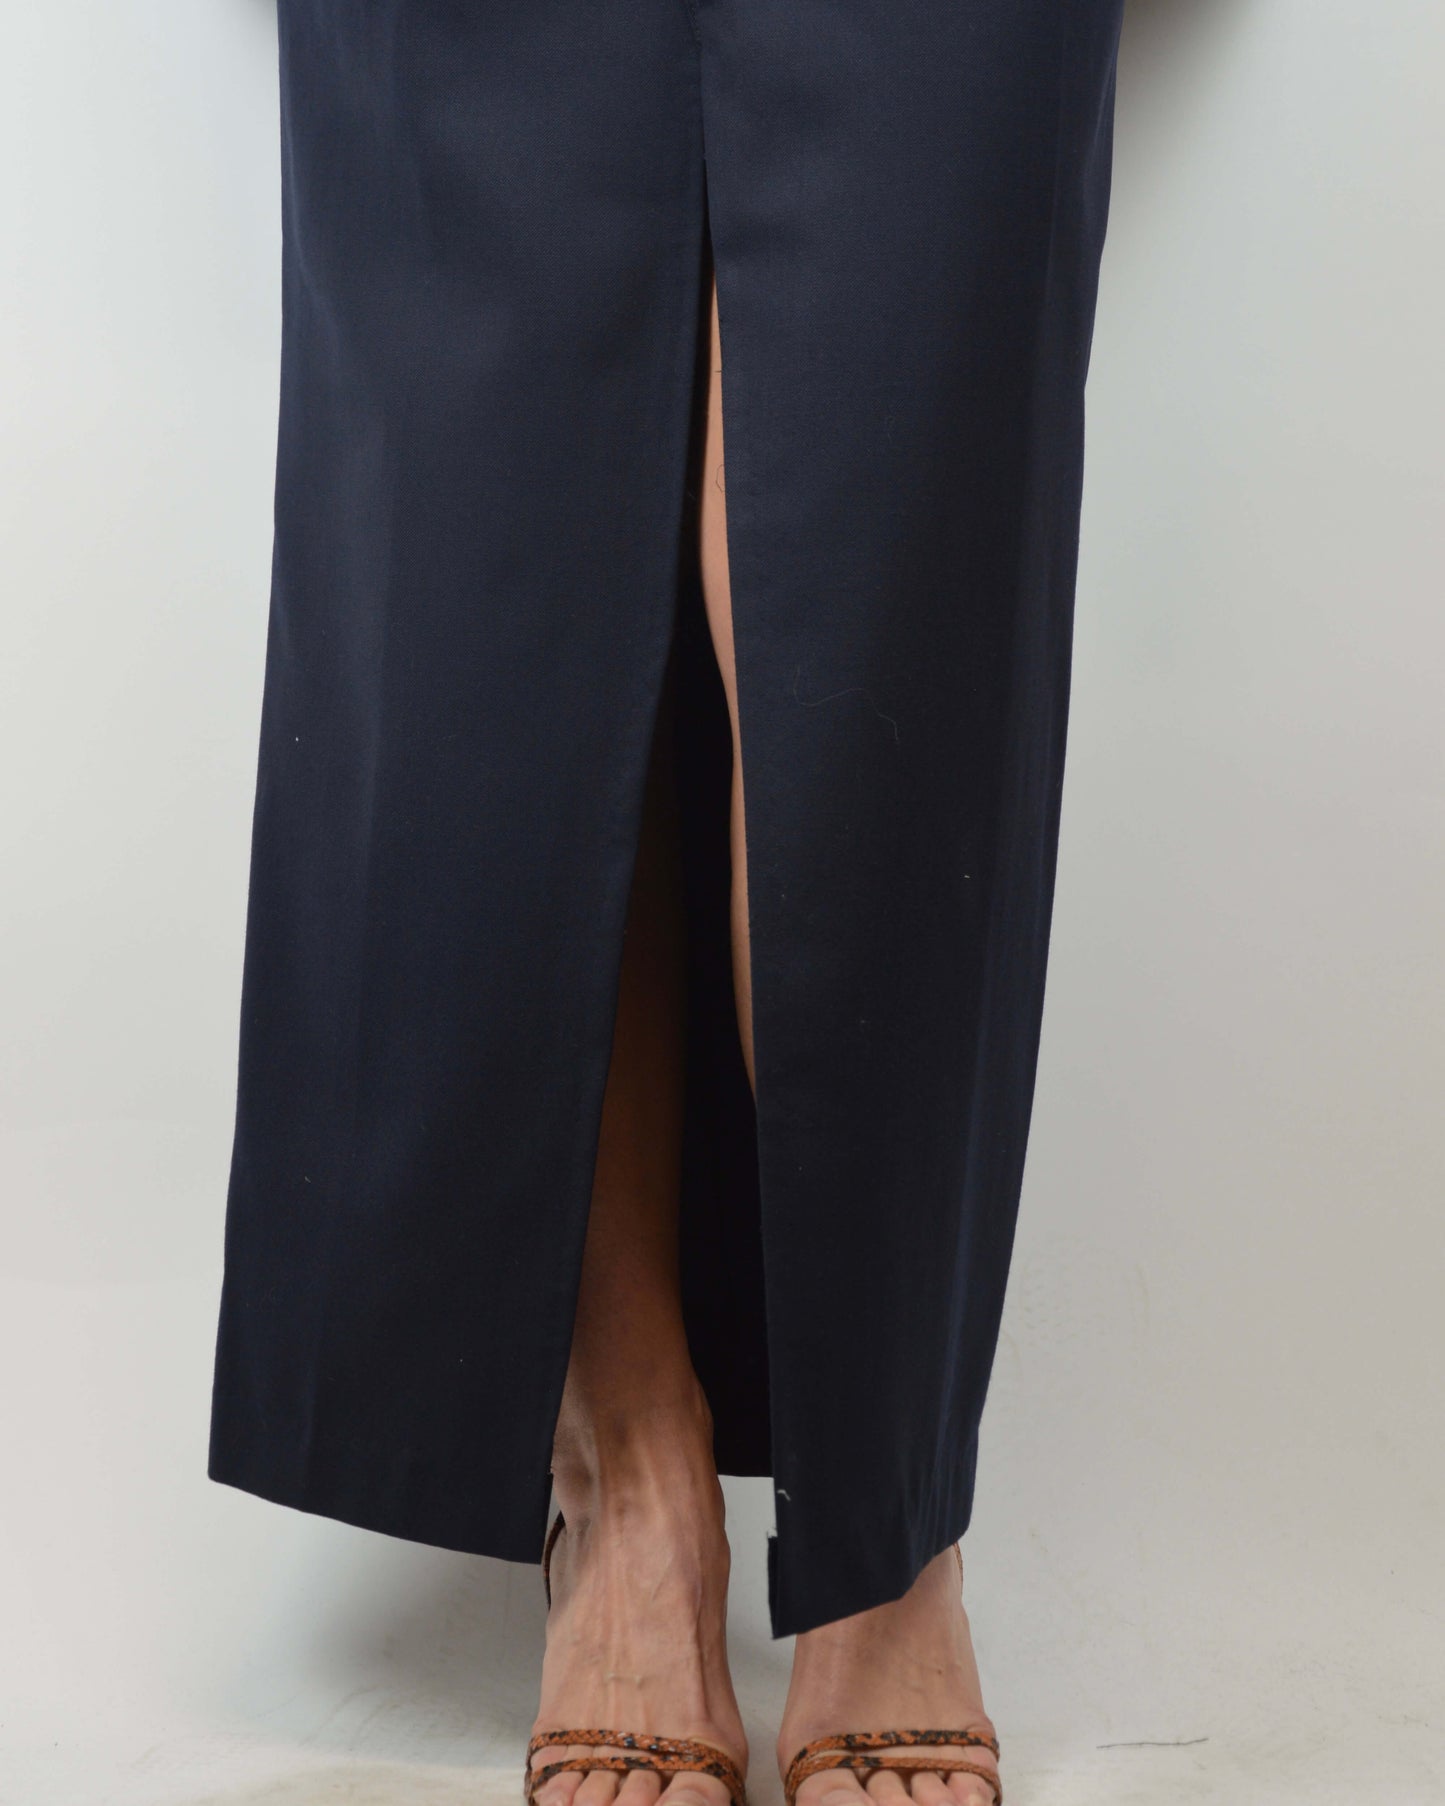 Skirt Suit - Double Breasted Navy (S/M)